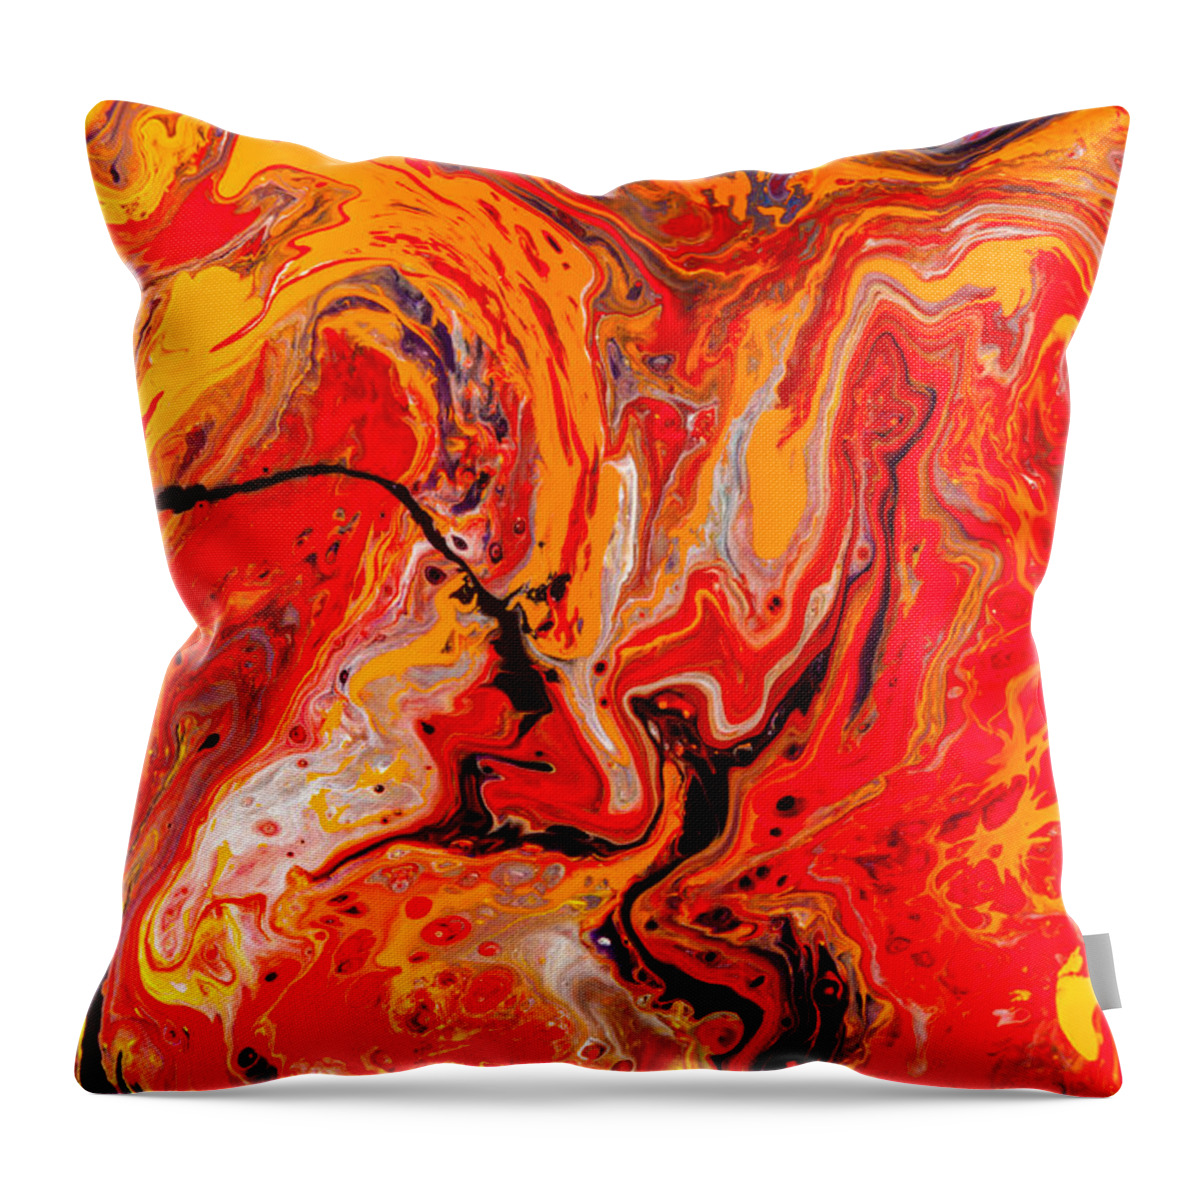 Abstract Throw Pillow featuring the painting Belly Dancers - Abstract Colorful Mixed Media Painting by Modern Abstract